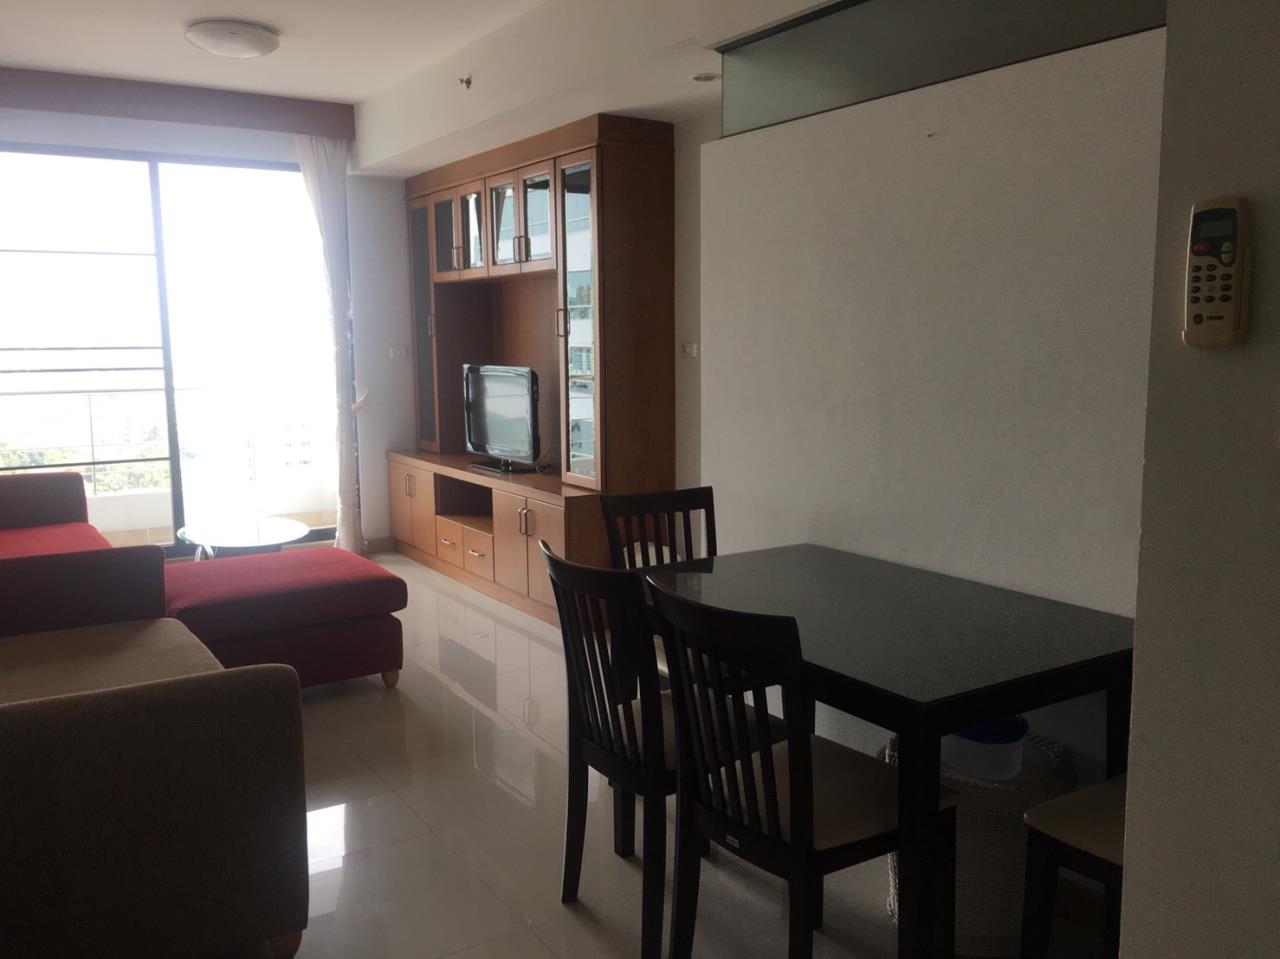 Quality Life Property Agency's 2 Bed For Rent At Supalai Premier Asoke, Modern And Nice Decorated Room On High Floor 20 4